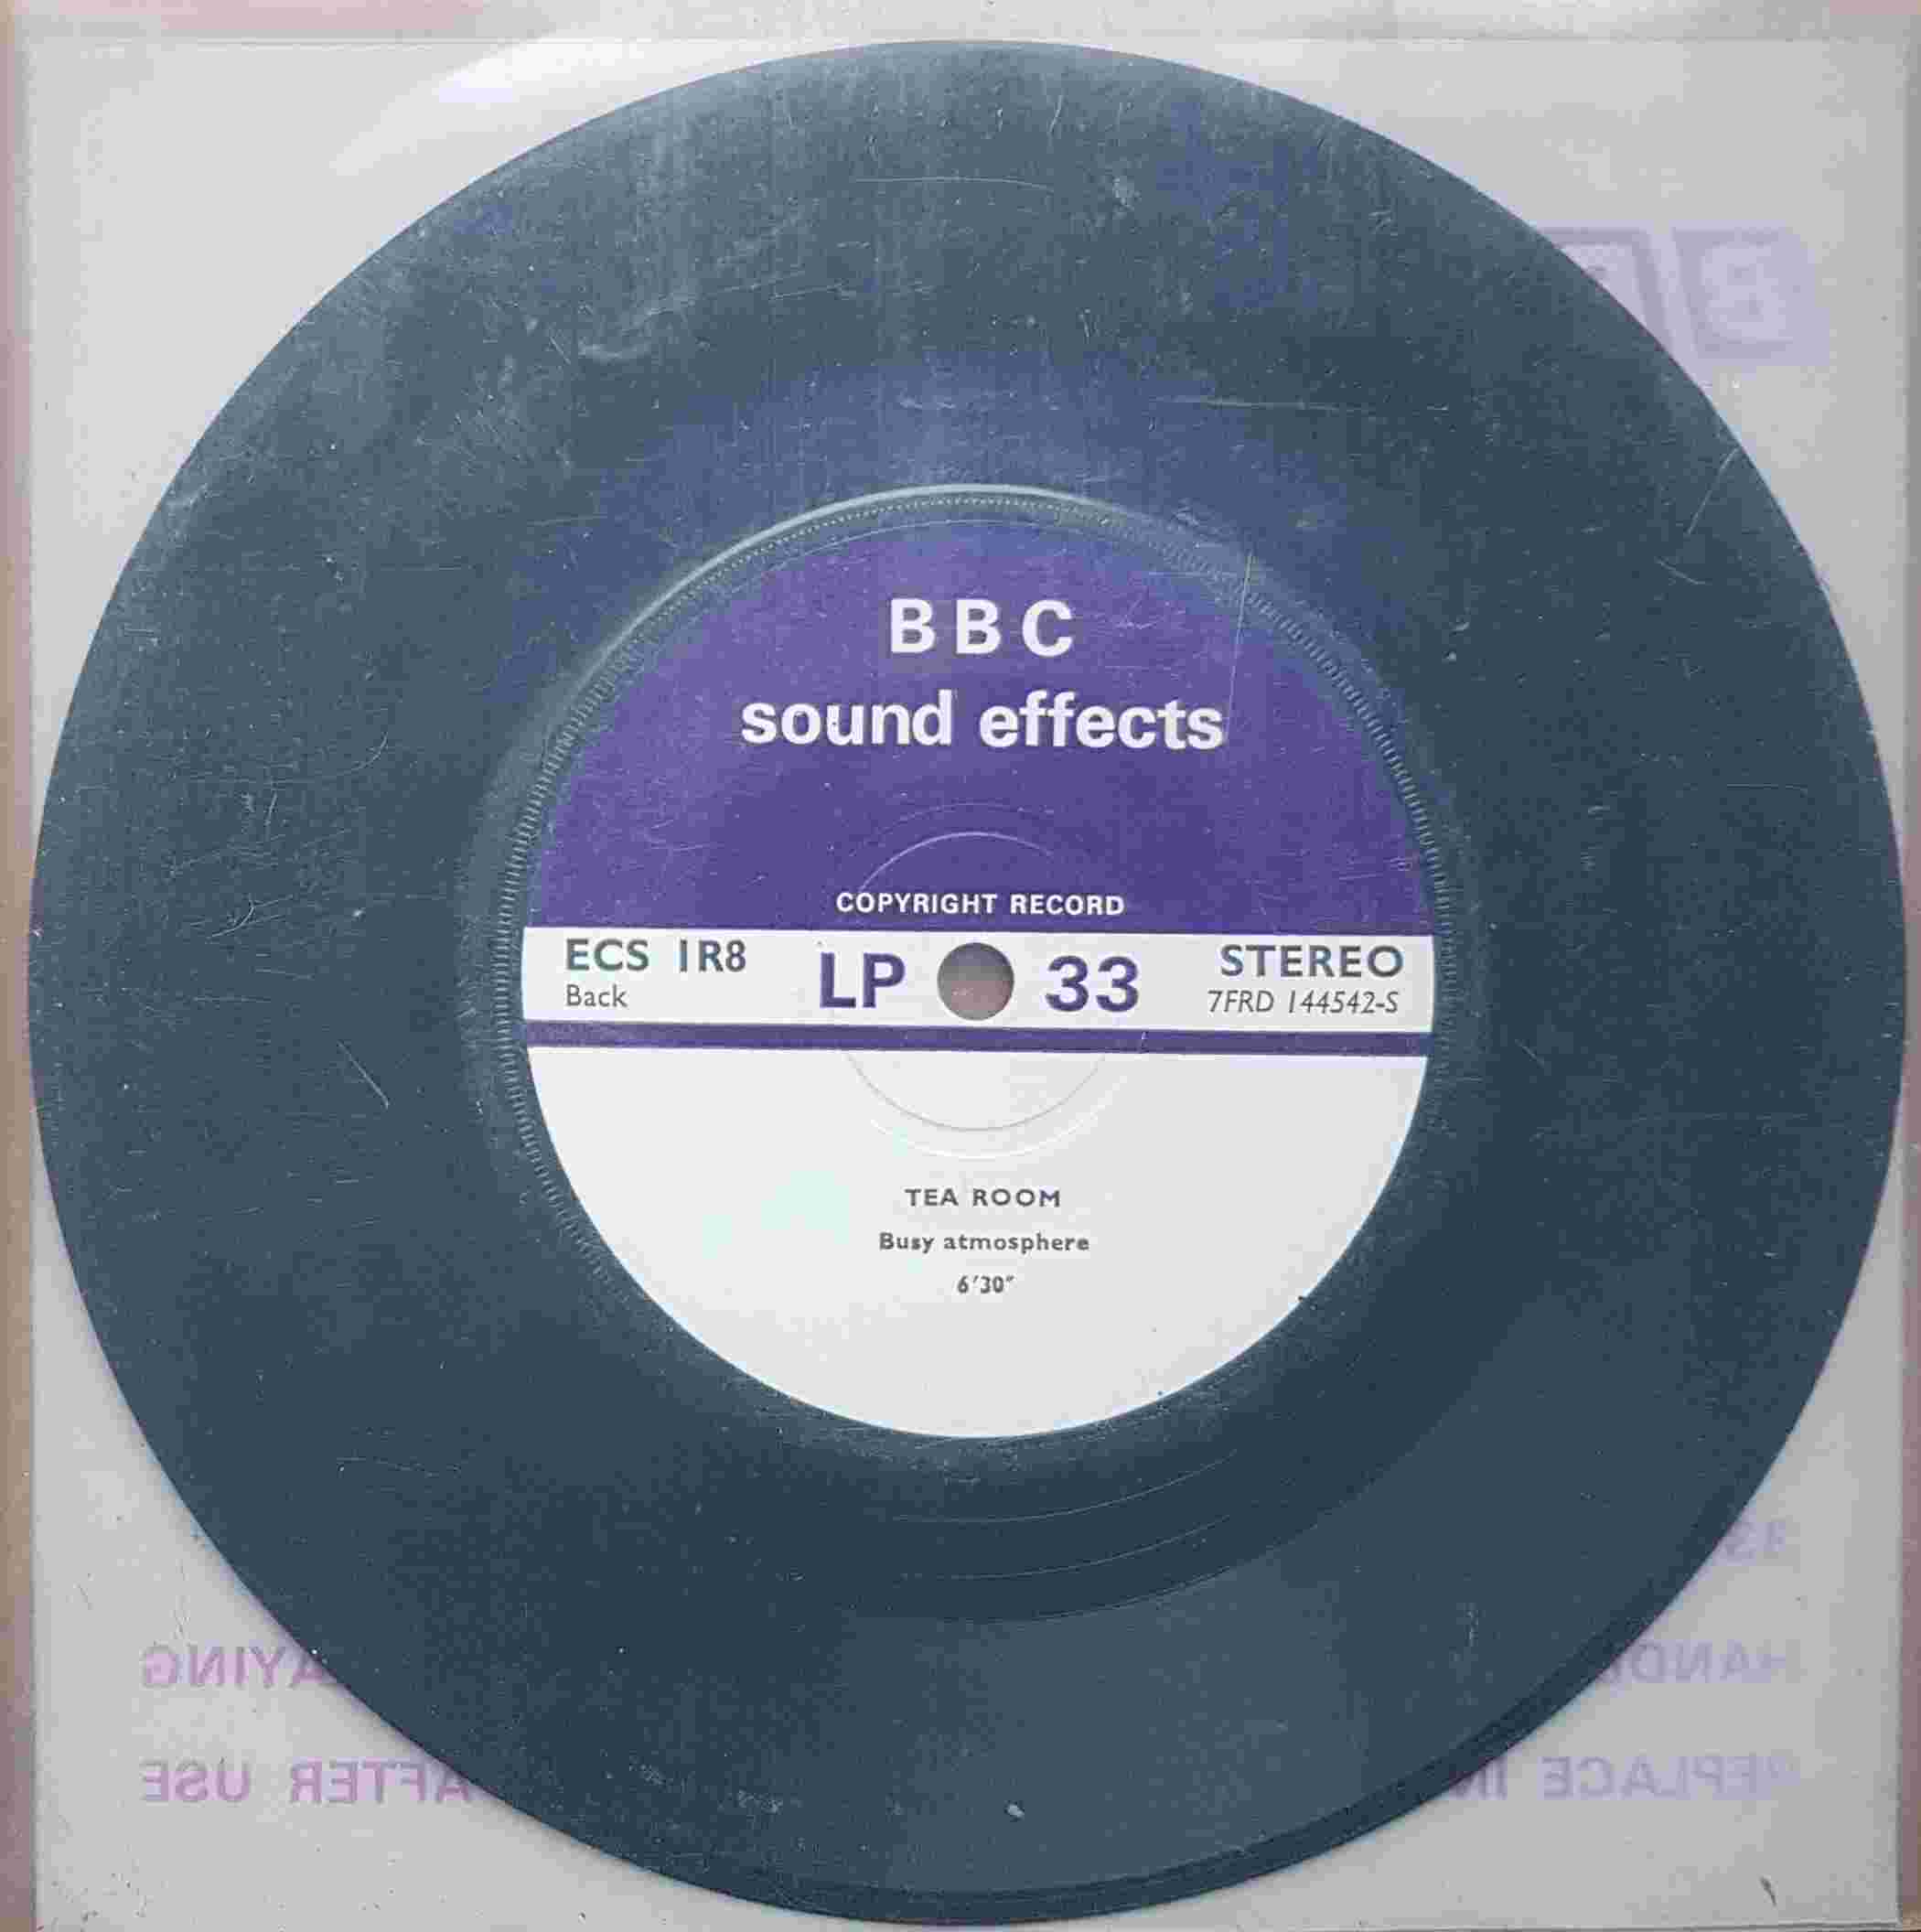 Picture of ECS 1R8 Restaurant / Tea room by artist Not registered from the BBC records and Tapes library